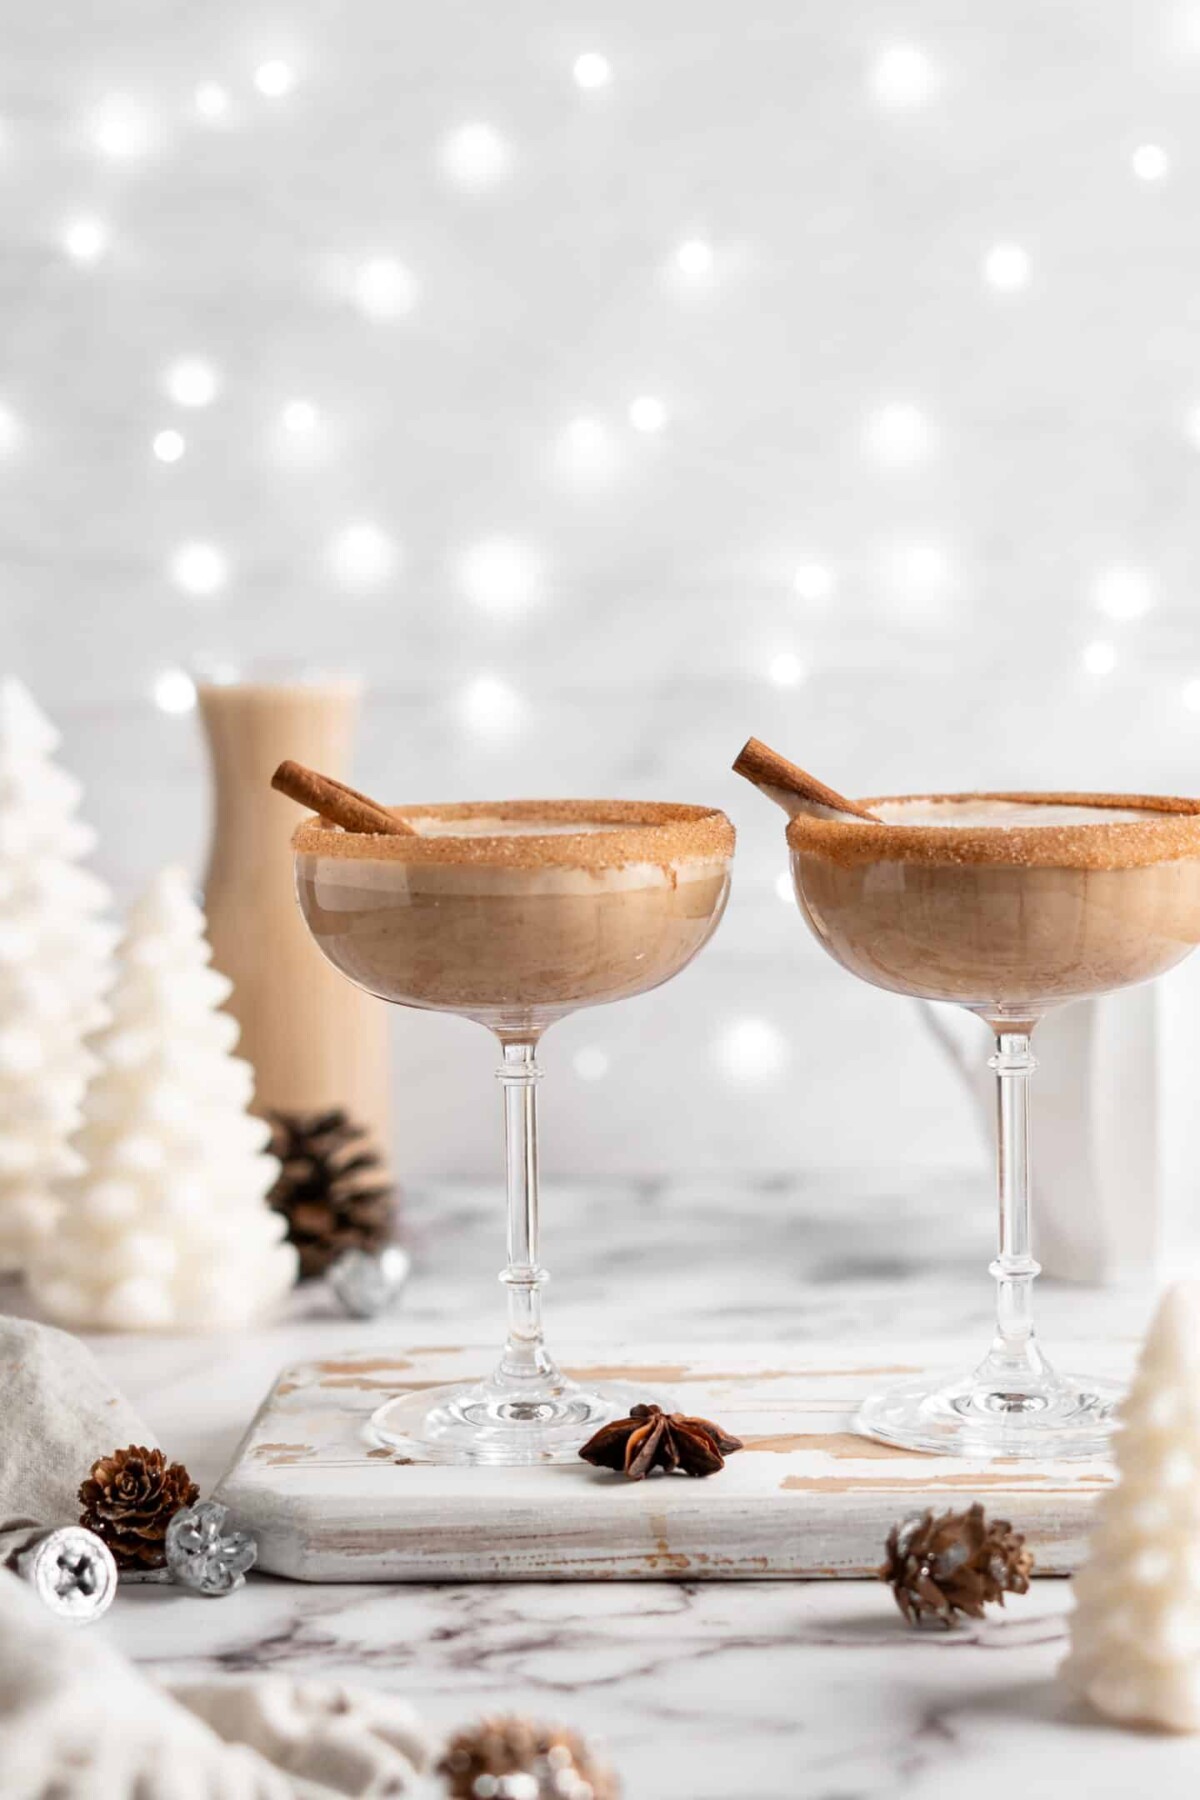 Two cocktail glasses filled with vegan eggnog, with cinnamon sugar rims and cinnamon sticks sticking out of them, surrounded by star anise pods and white Christmas decorations